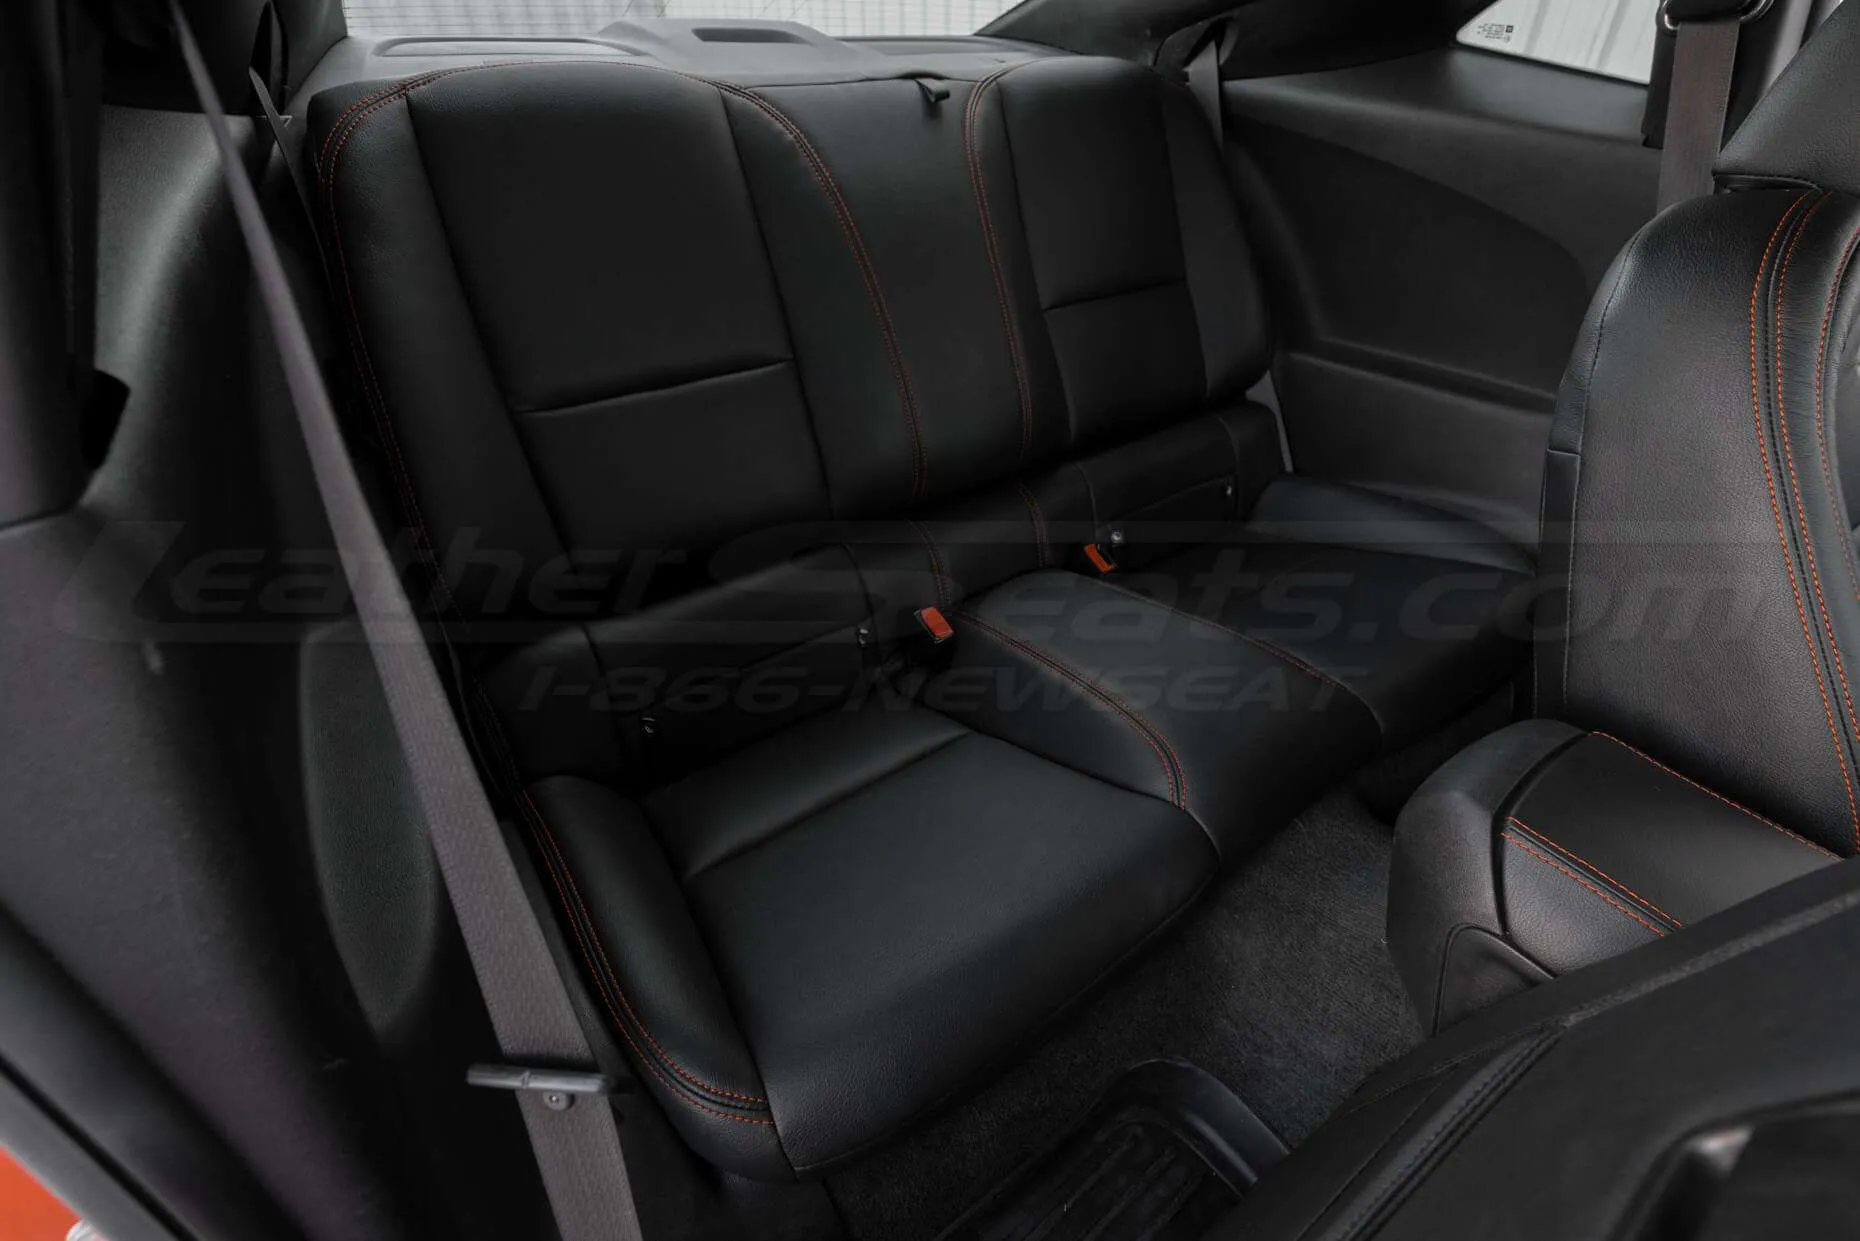 Chevrolet Camaro Leather Seats - Black - Rear seats from passenger side